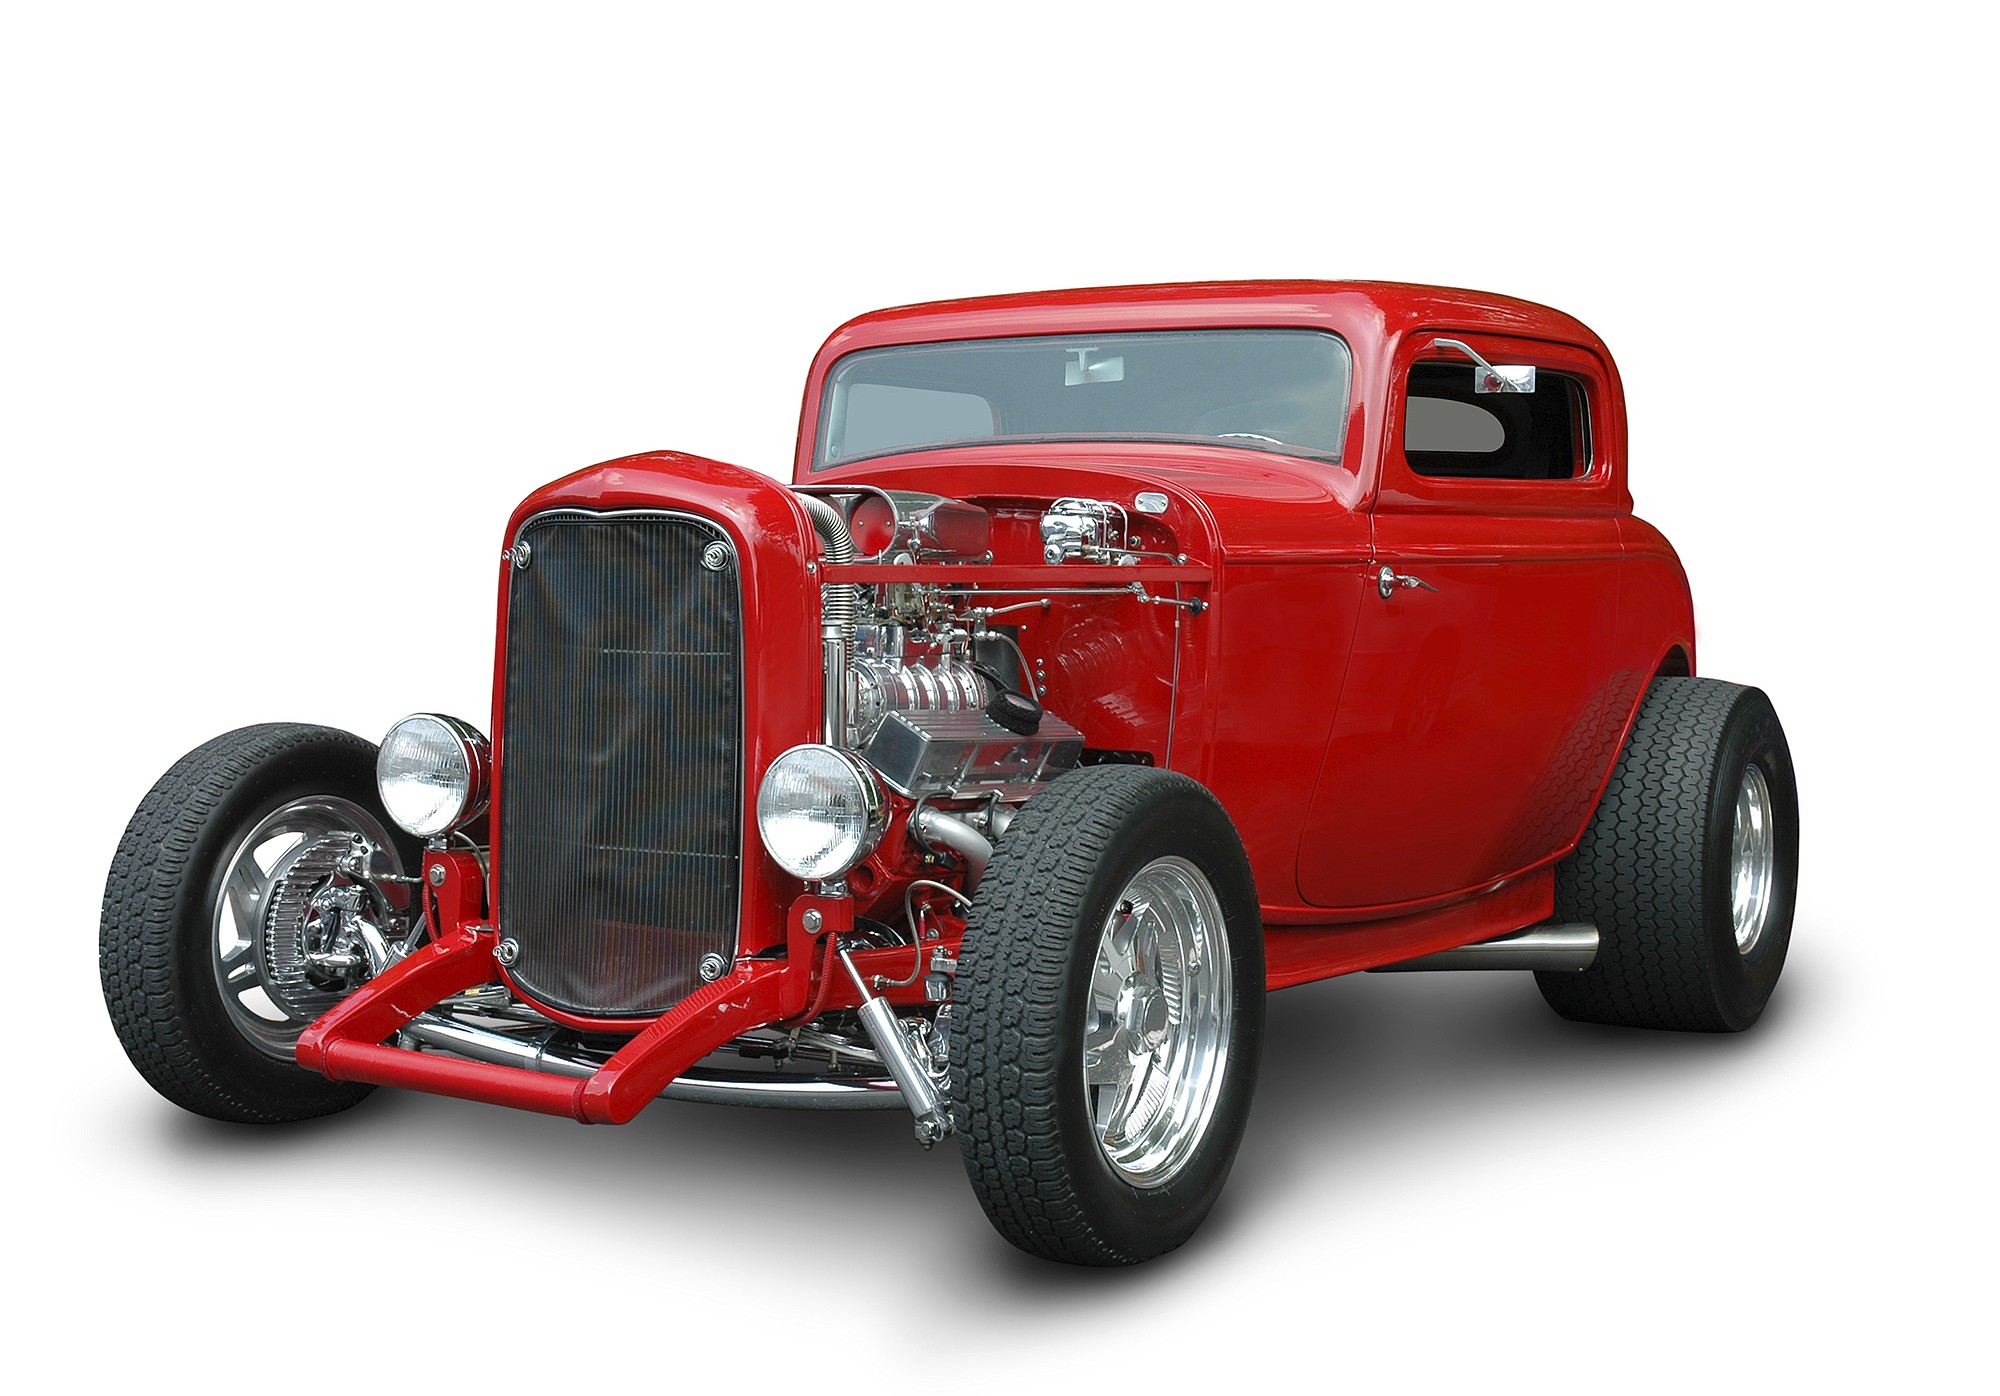 Classic cars and hot rods will be on display Saturday at Cruisin' the Gut in downtown Vancouver.